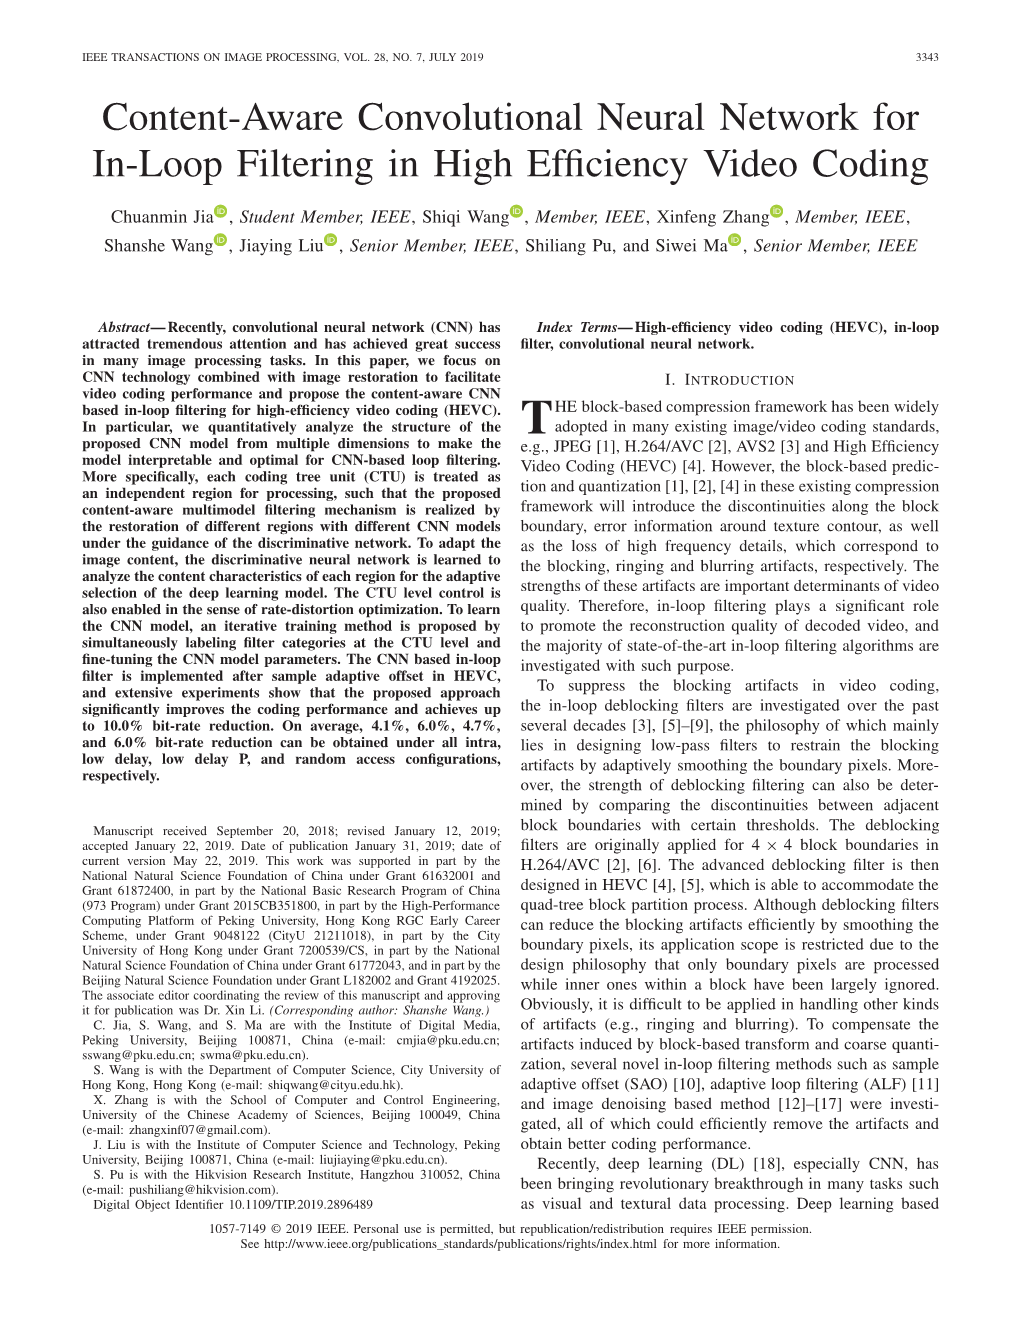 Content-Aware Convolutional Neural Network for In-Loop Filtering in High Efficiency Video Coding